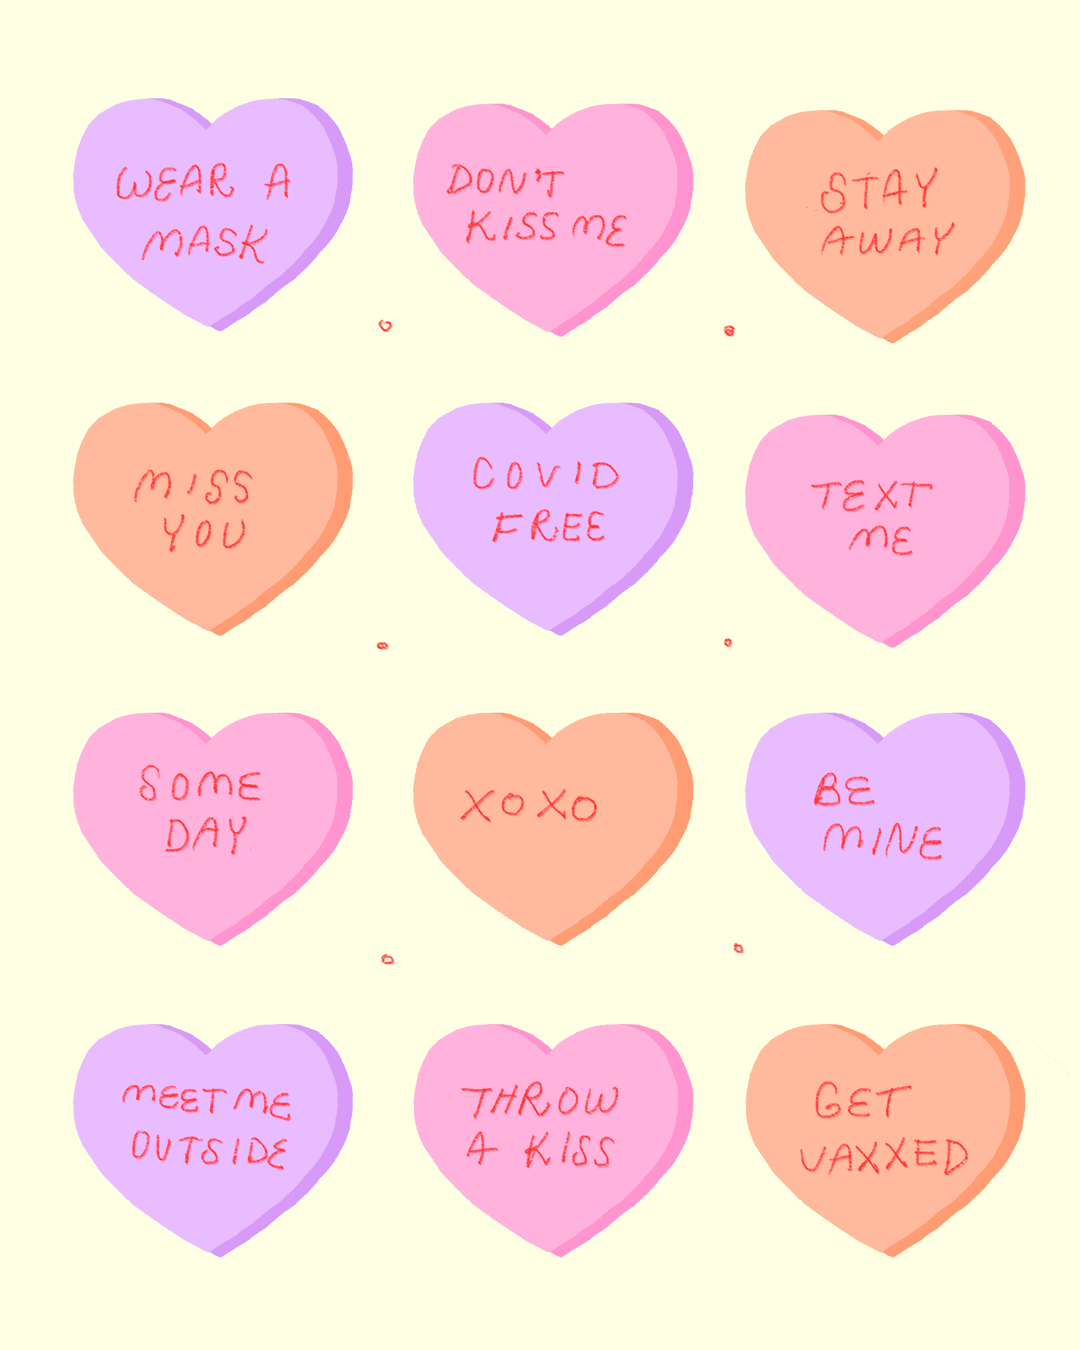 Illustrated image of candy hearts with printed text on them reading "Wear a Mask, Don't Kiss Me, Stay Away, Miss you, Covid Free, Text Me, Some Day, XOXO, Be Mine, Meet Me Outside, Throw a Kiss, Get Vaxxed"